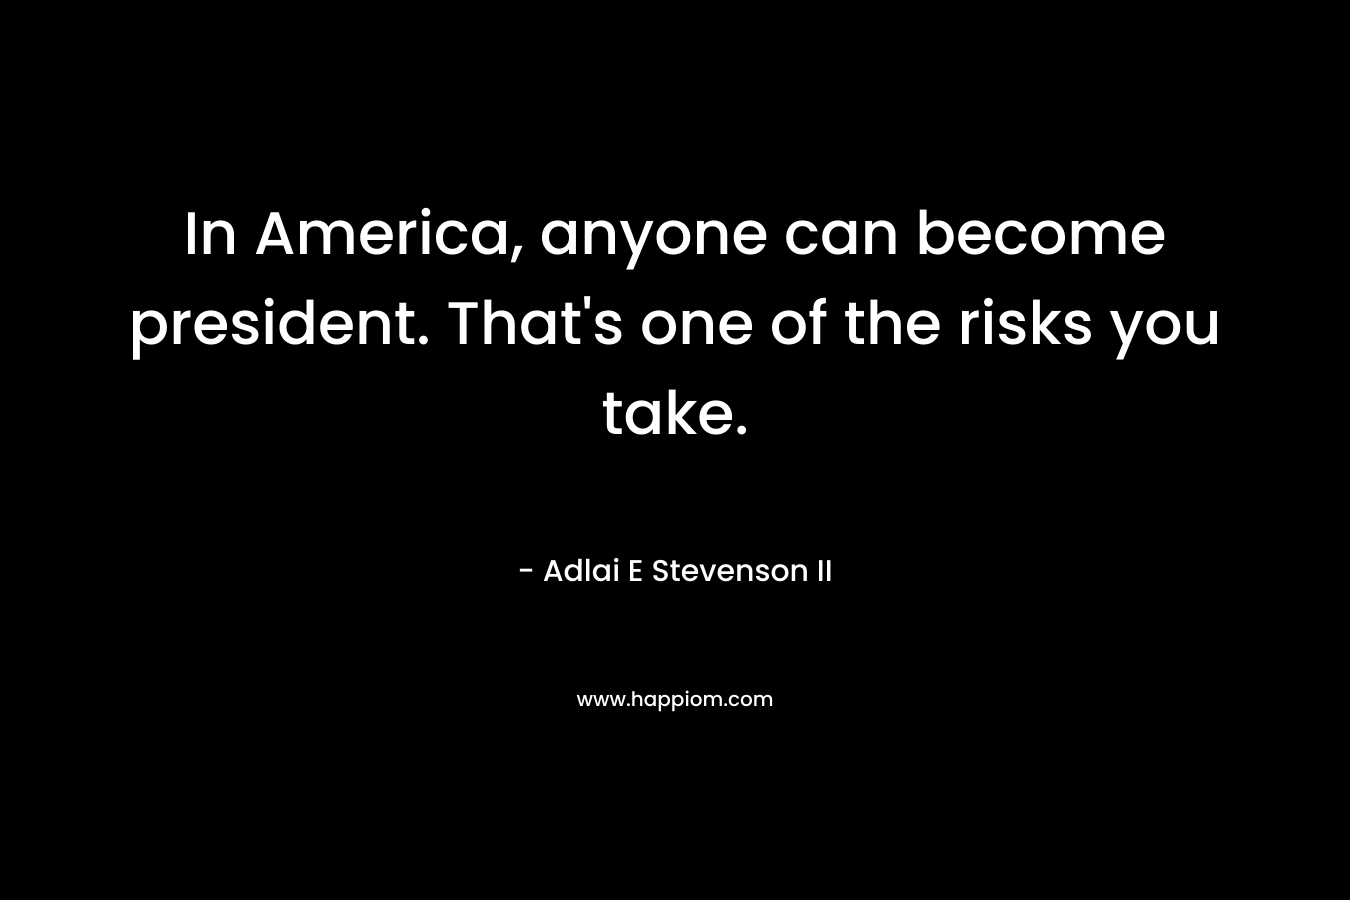 In America, anyone can become president. That's one of the risks you take.